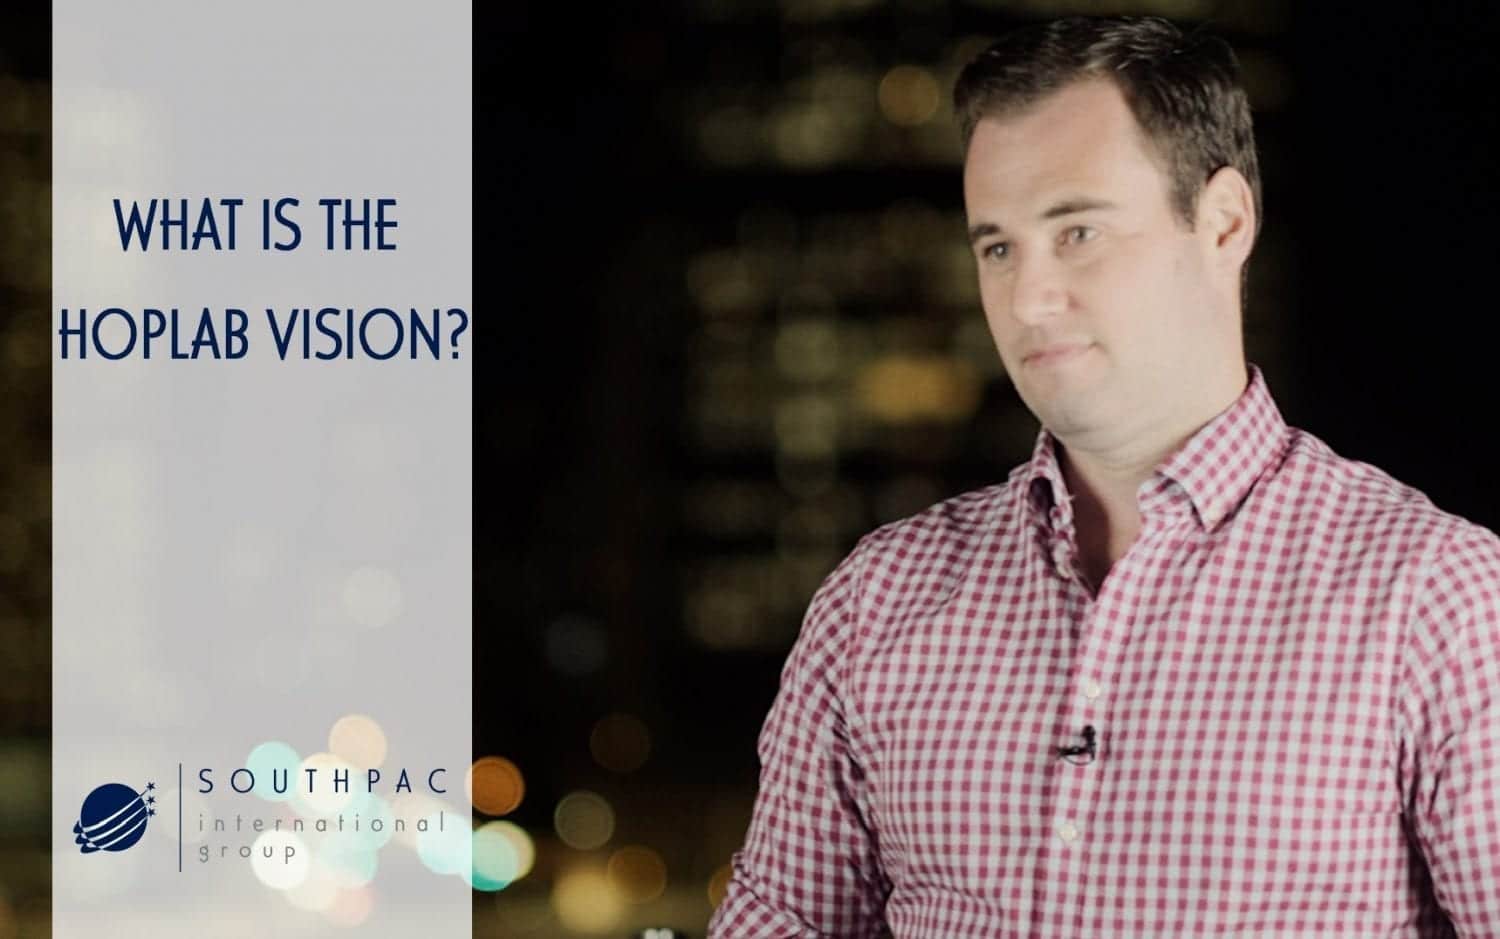 Find out "What is HOPLAB Vision" with Southpac Internationals CEO, Andy Shown